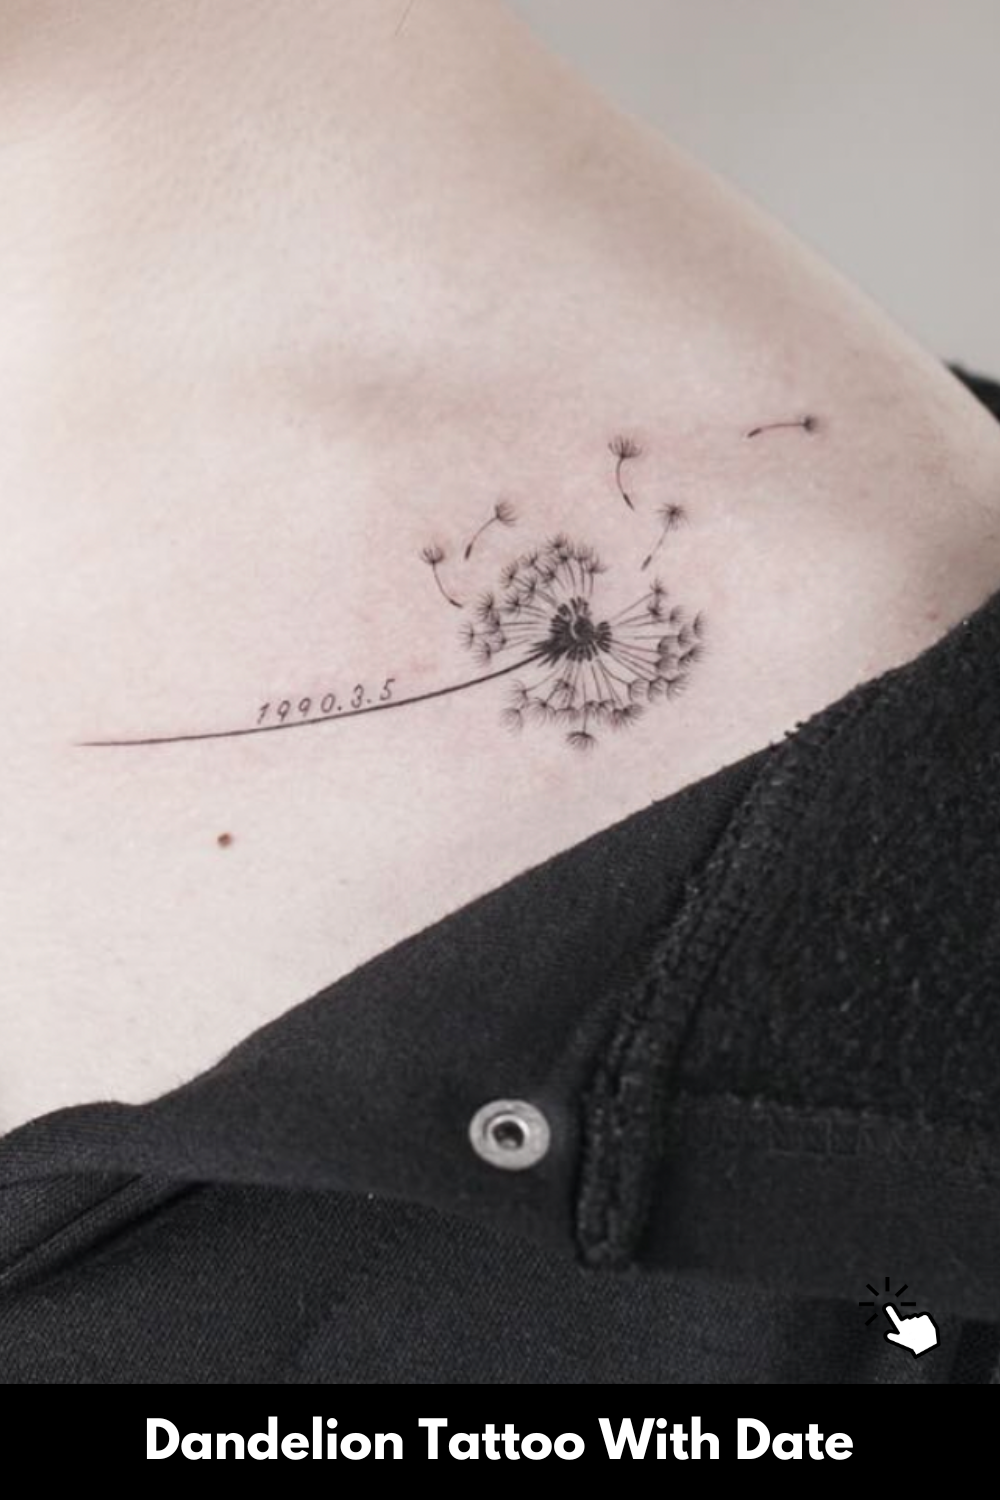 blowing-Dandelion-tattoo-with-date